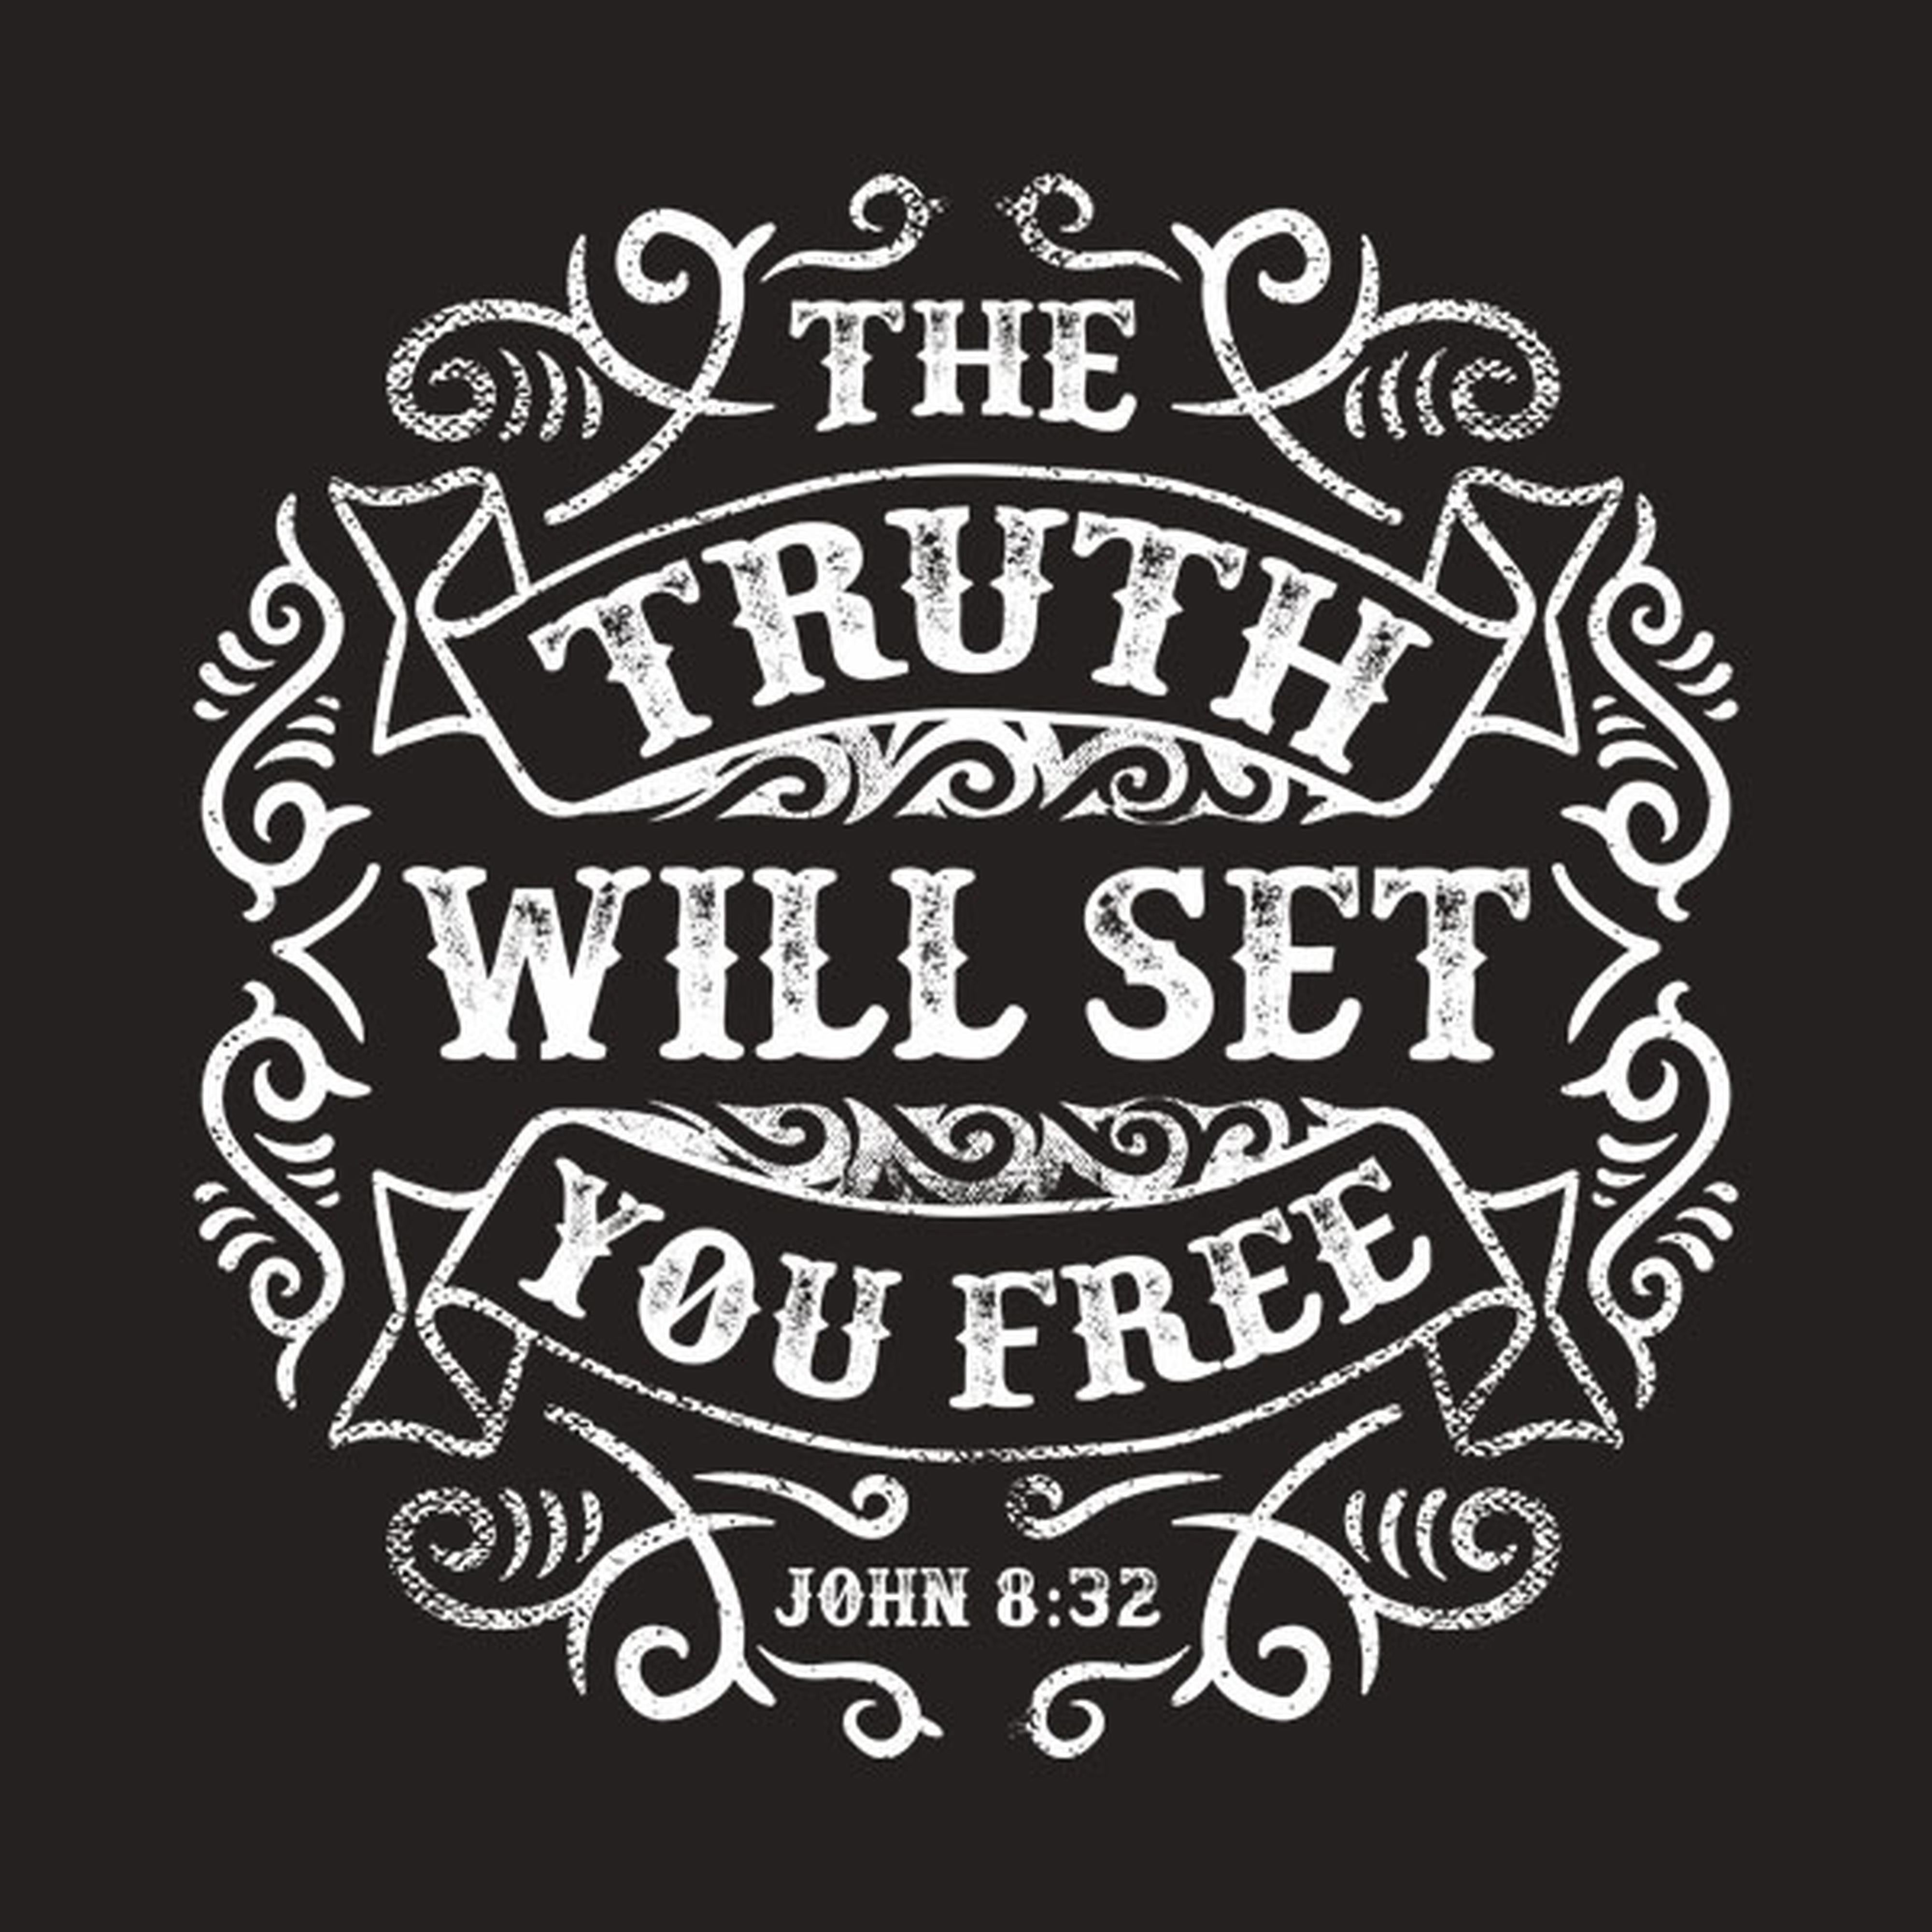 The truth will set you free - T-shirt